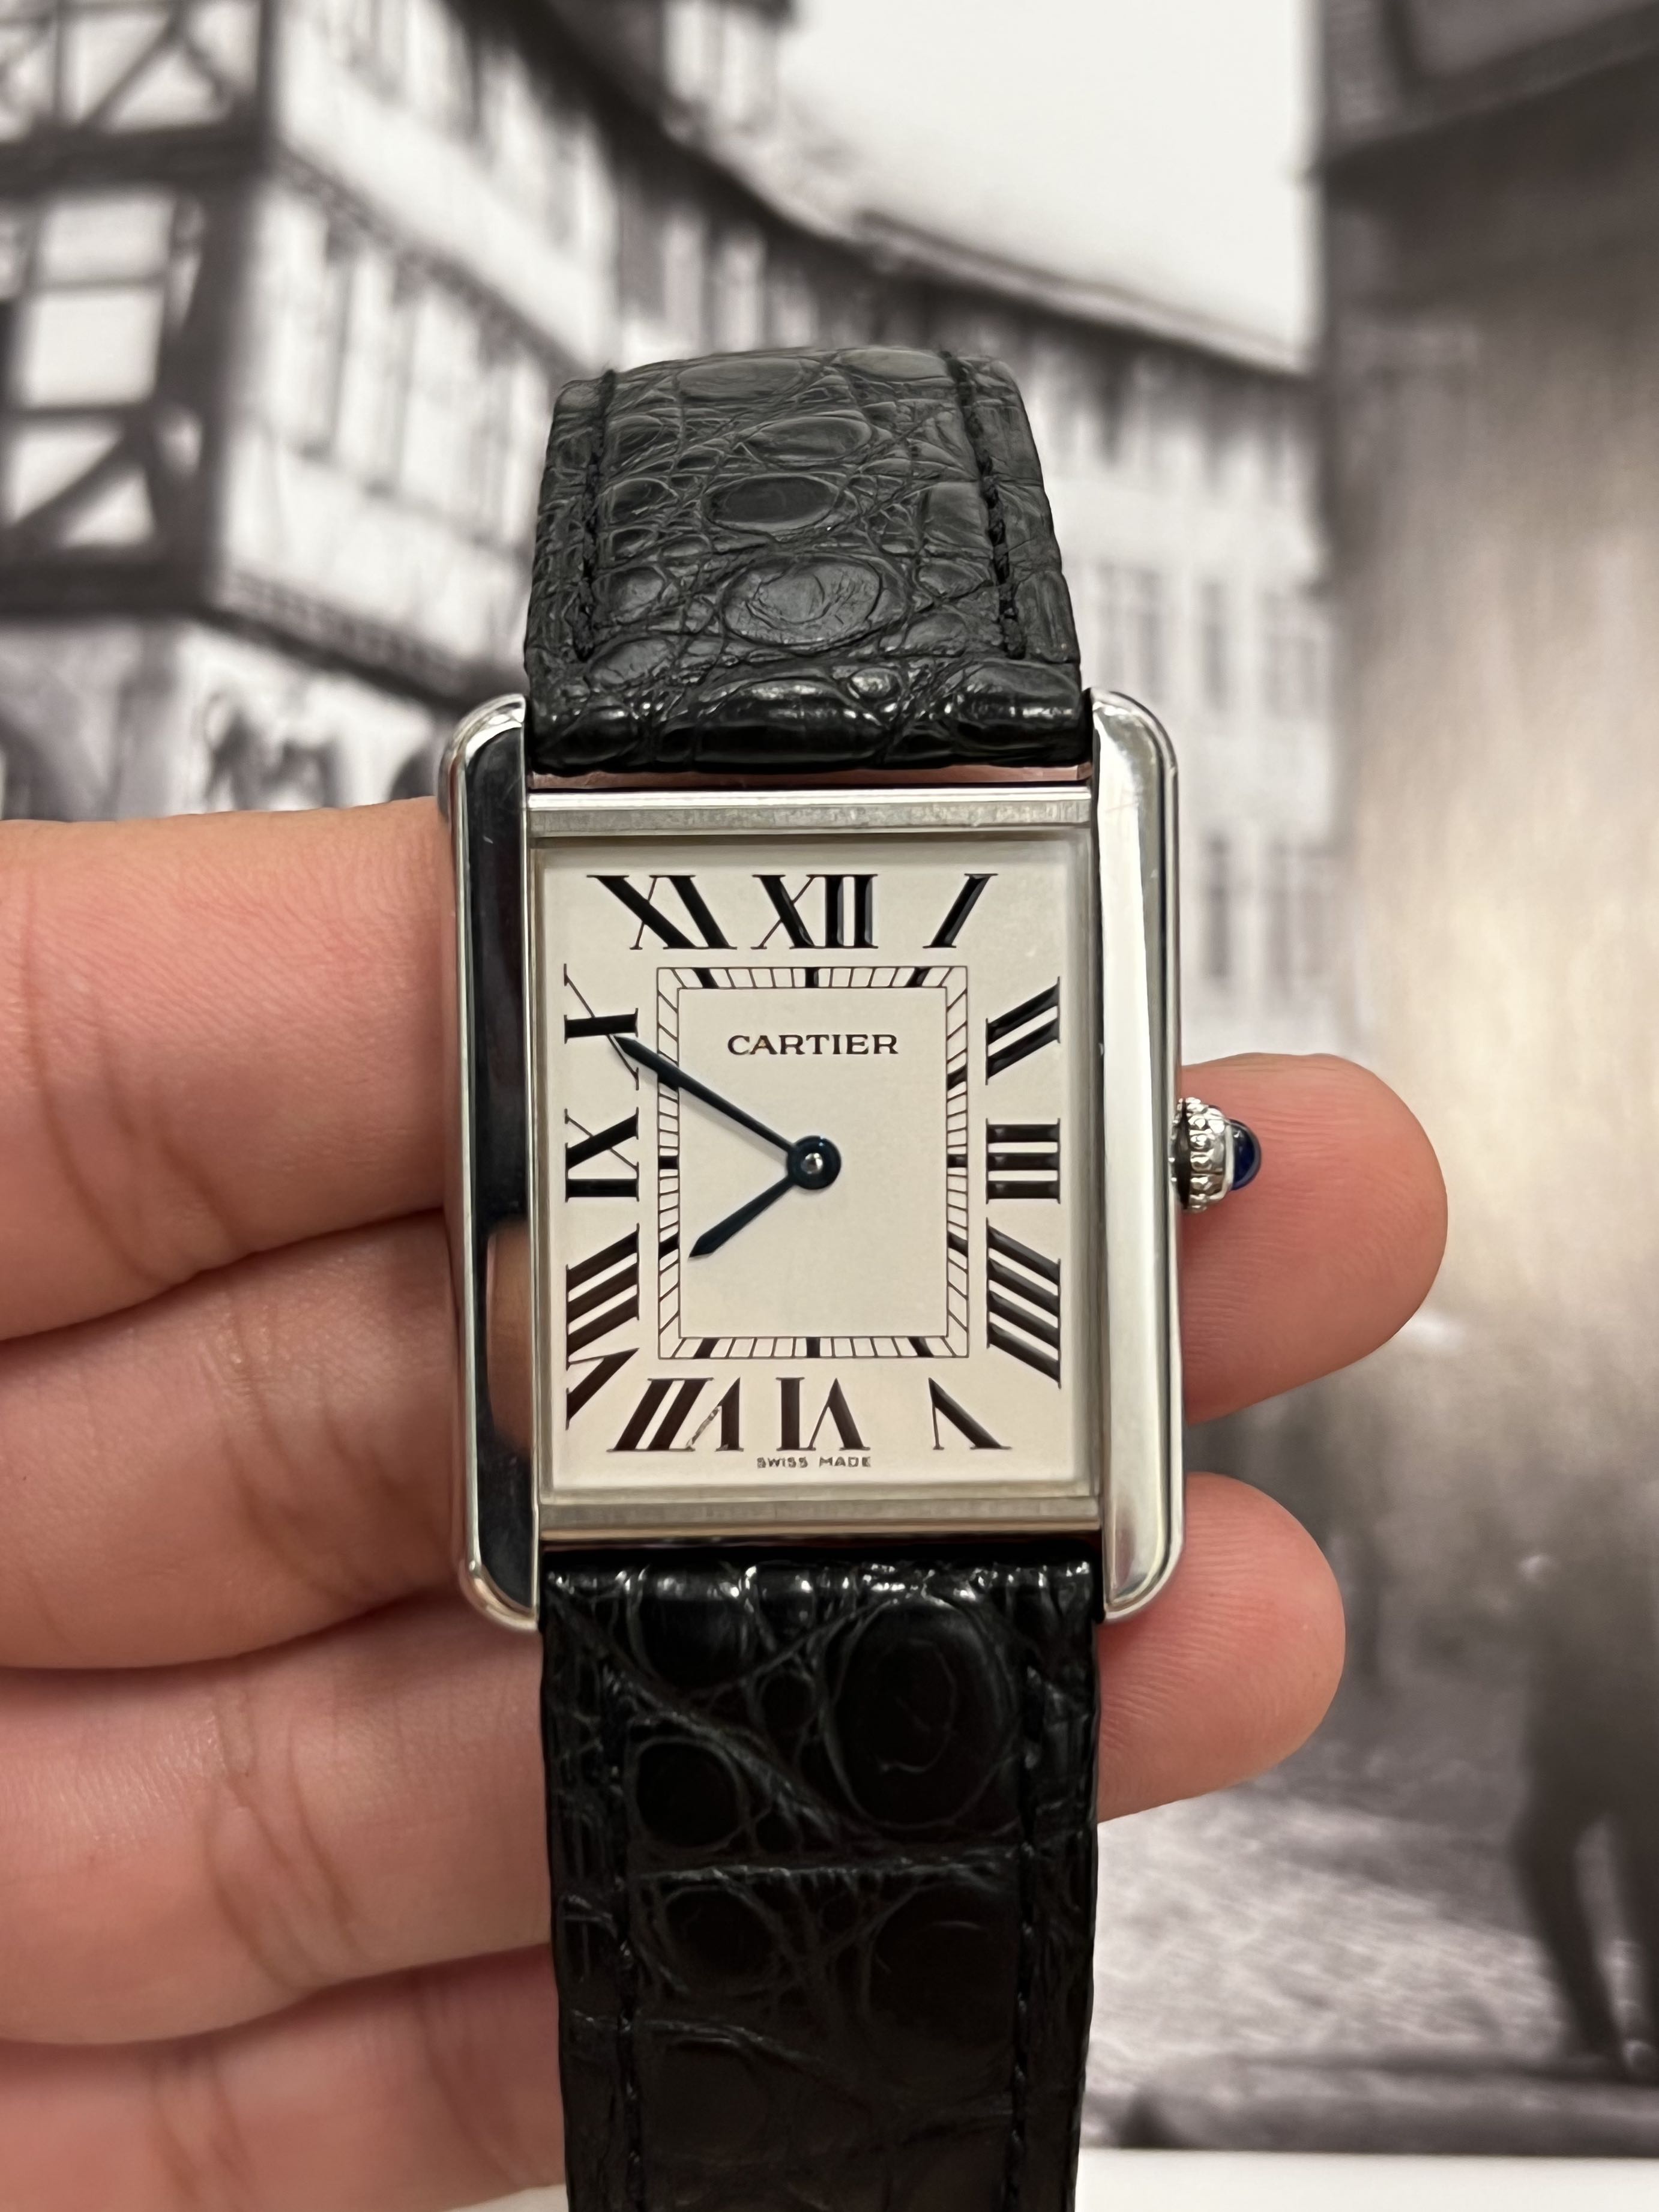 WTS] Cartier Tank Solo Large Ref 2715 - $1999